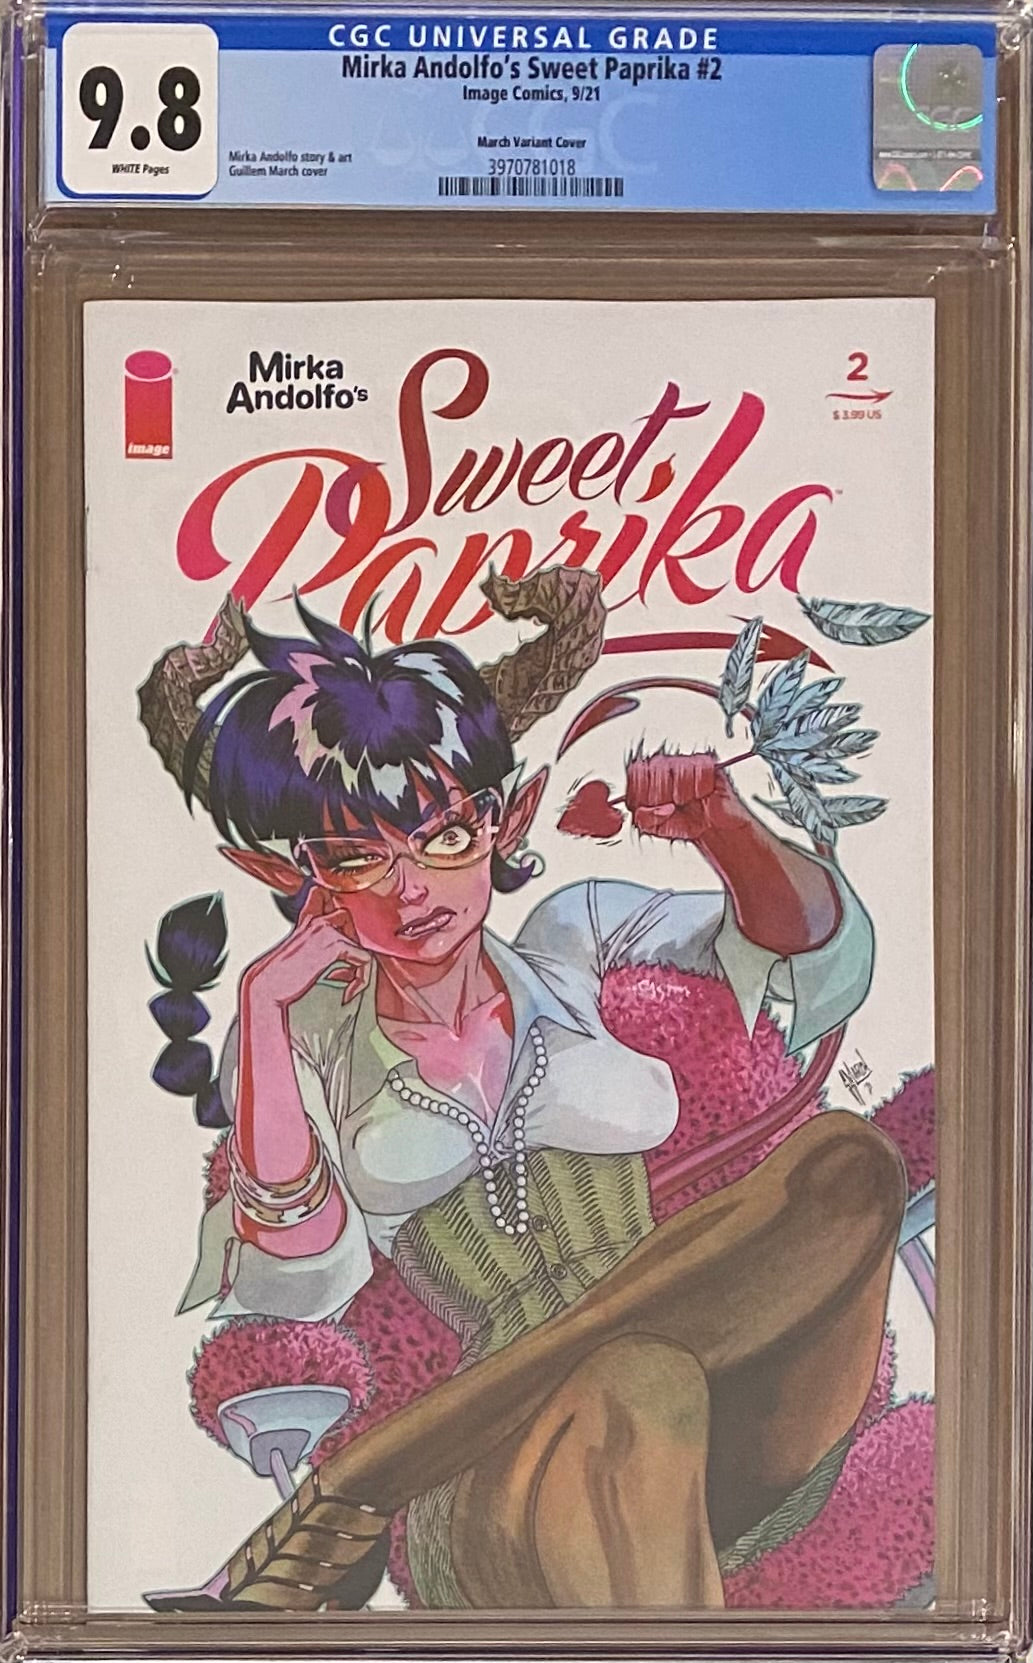 Sweet Paprika #2 March Variant CGC 9.8